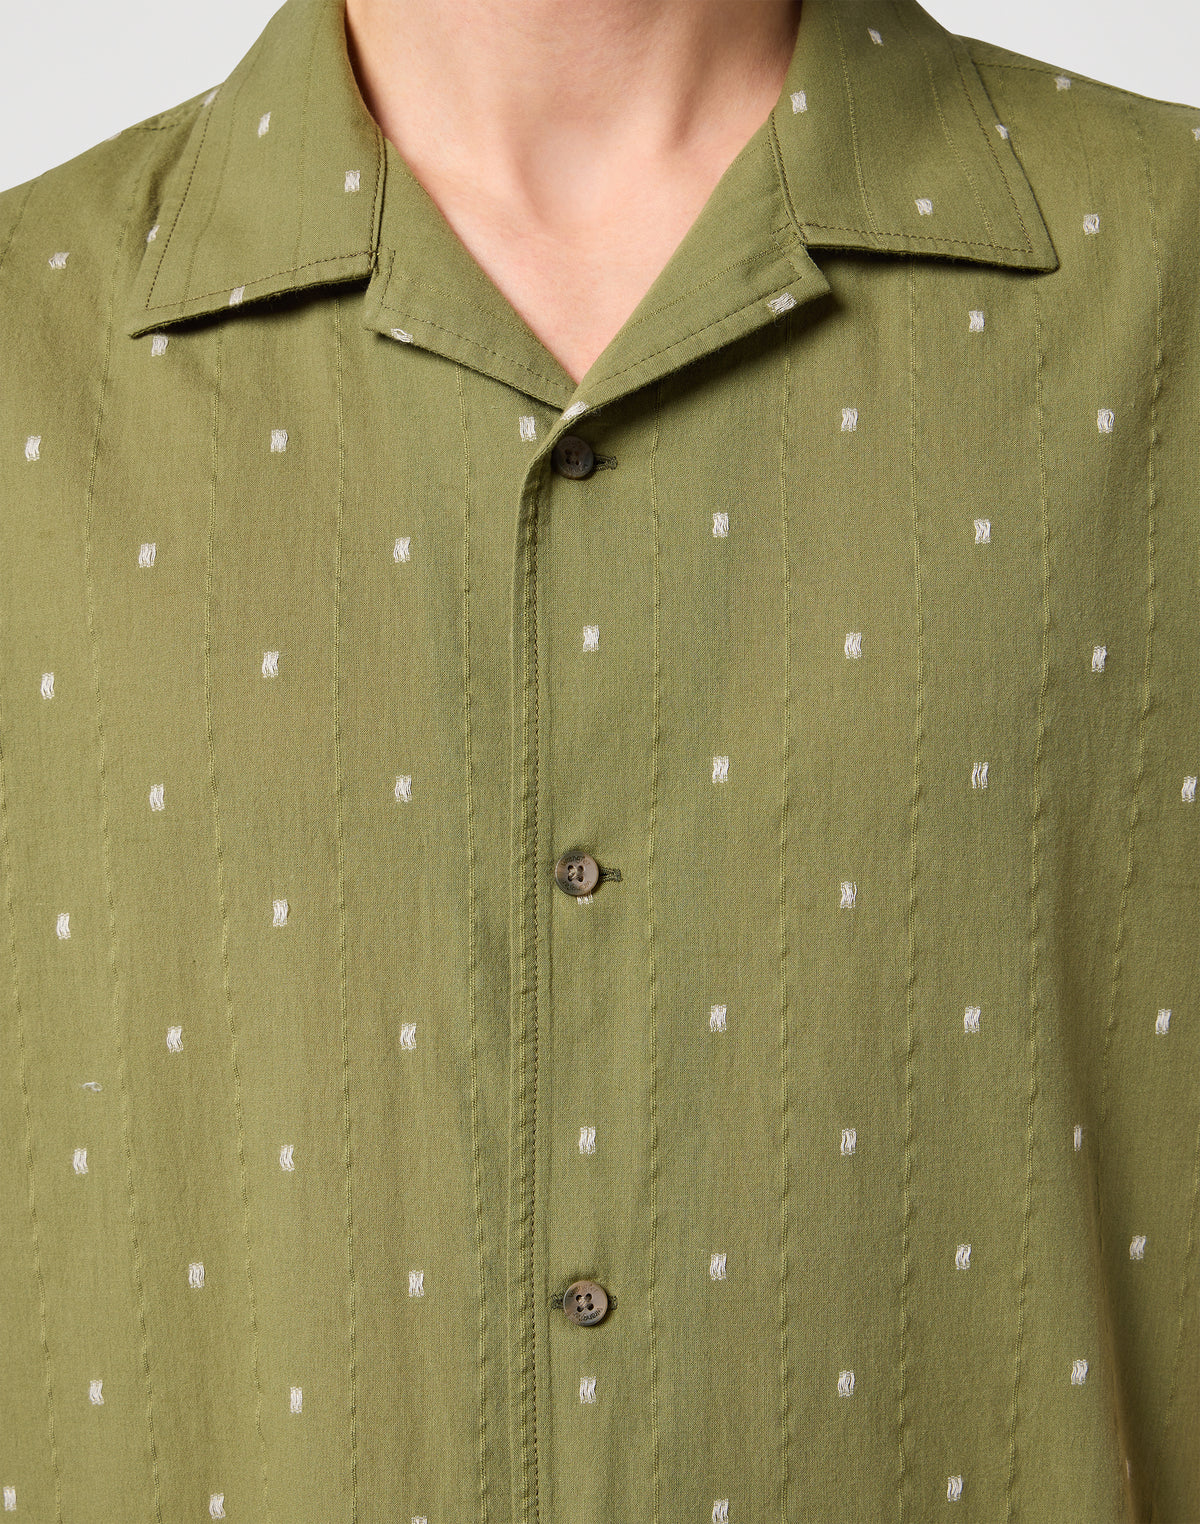 Resort Shirt in Dusty Olive